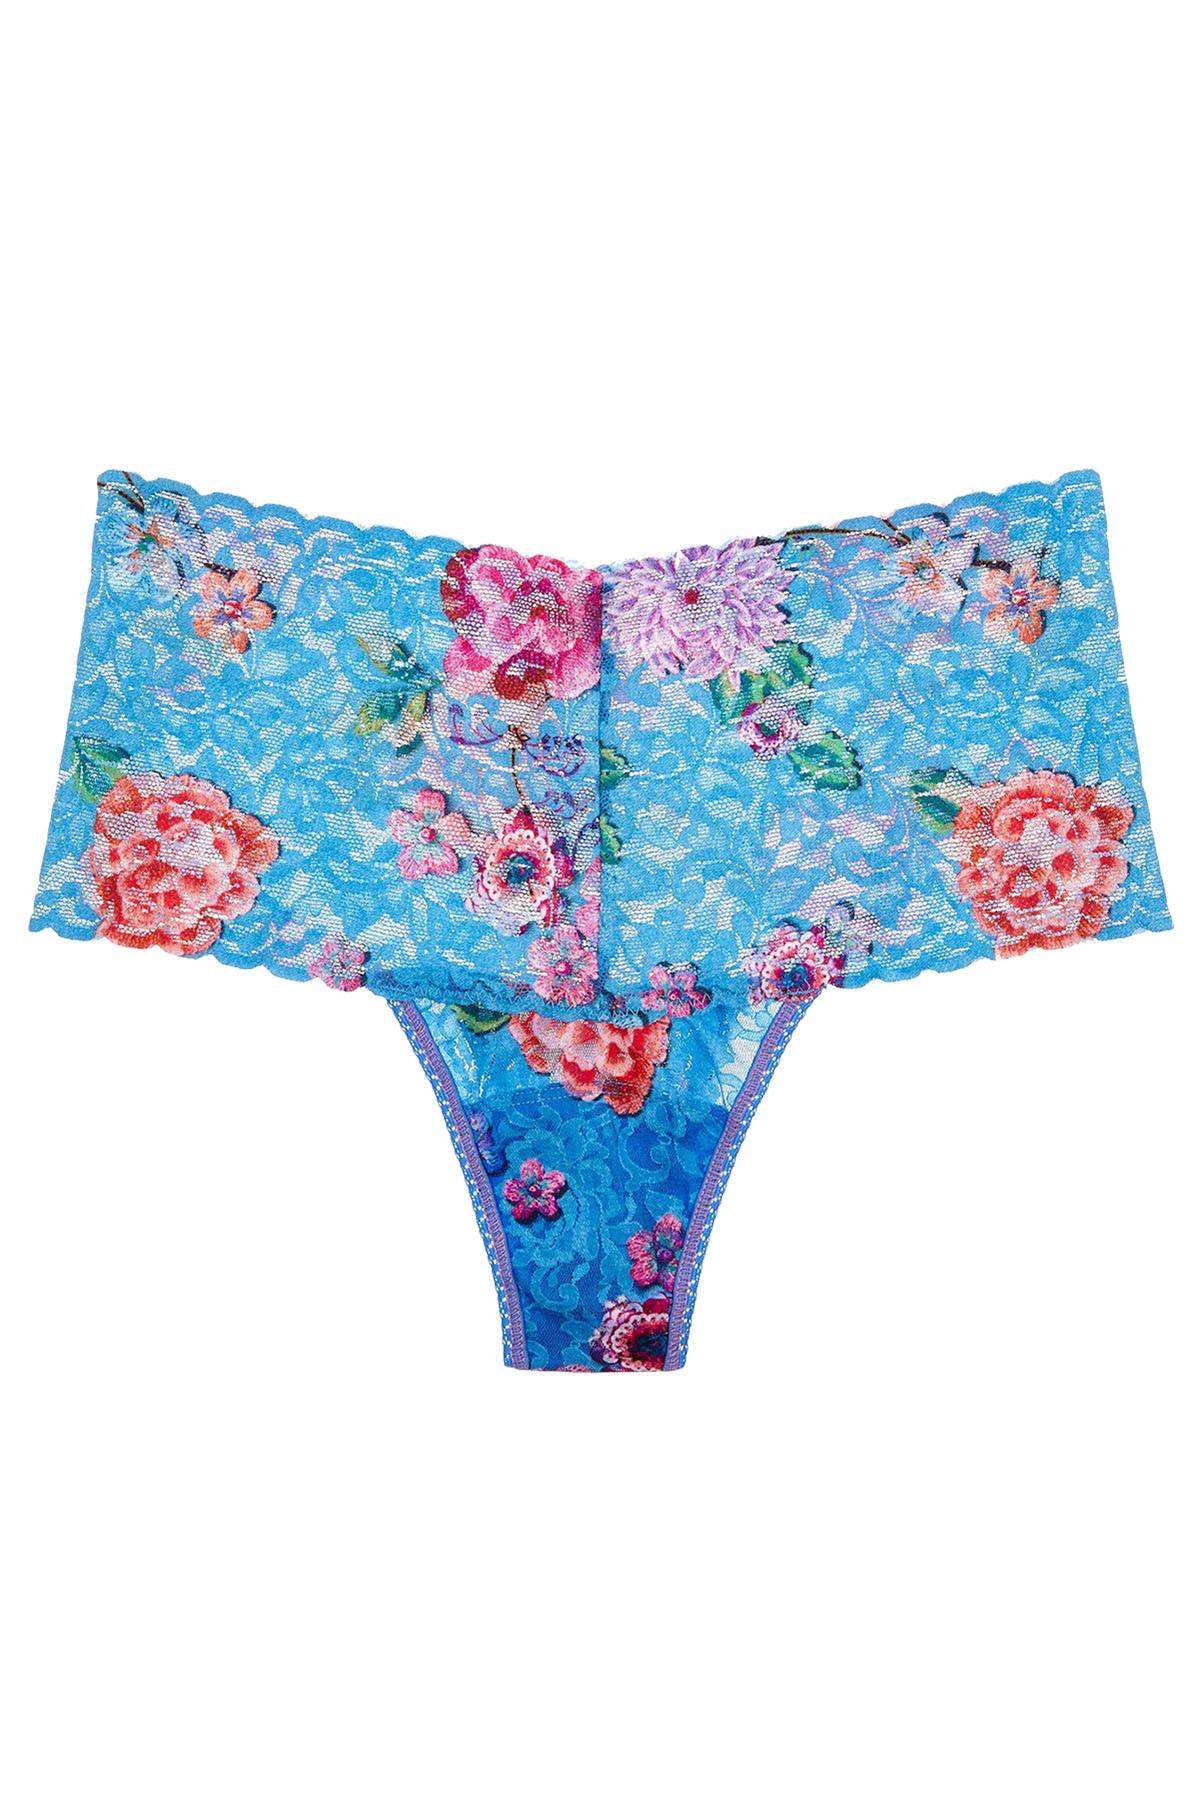 Hanky Panky Blue/Multi Floral Janis Retro Sheer-Lace Thong